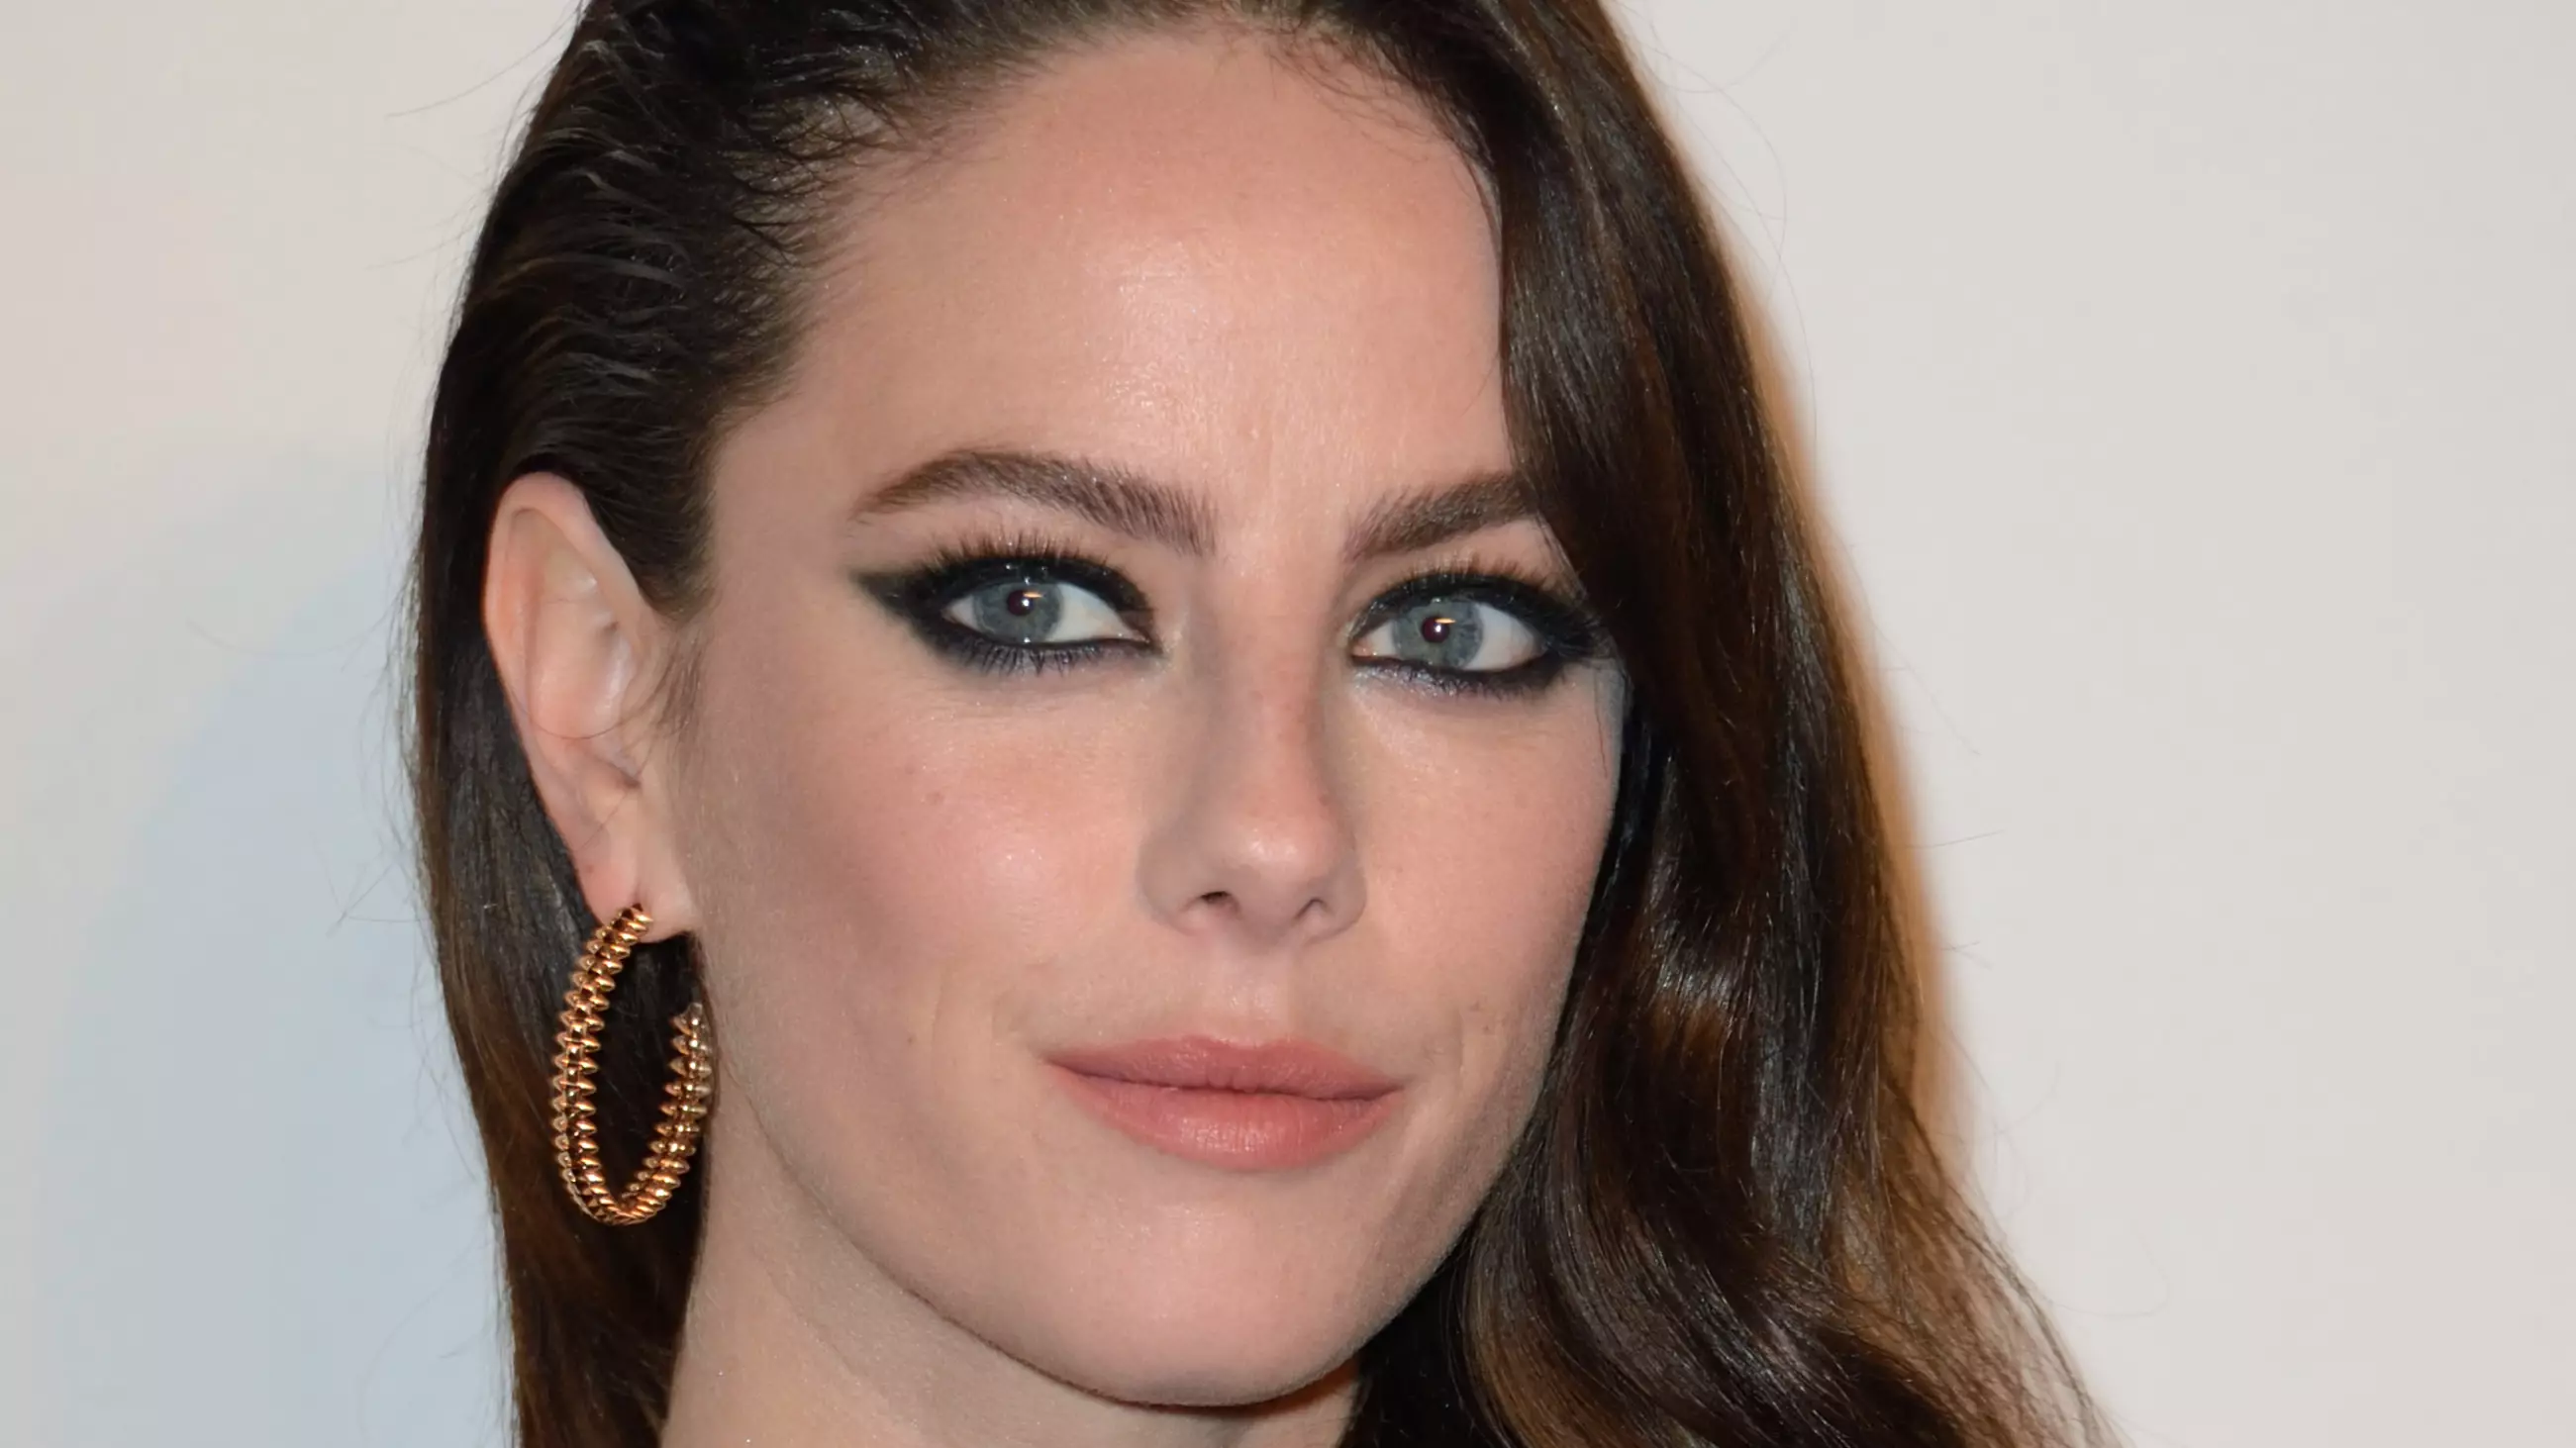 Skins Actor Kaya Scodelario 'Scared' After Opening Up About Naked Audition Request